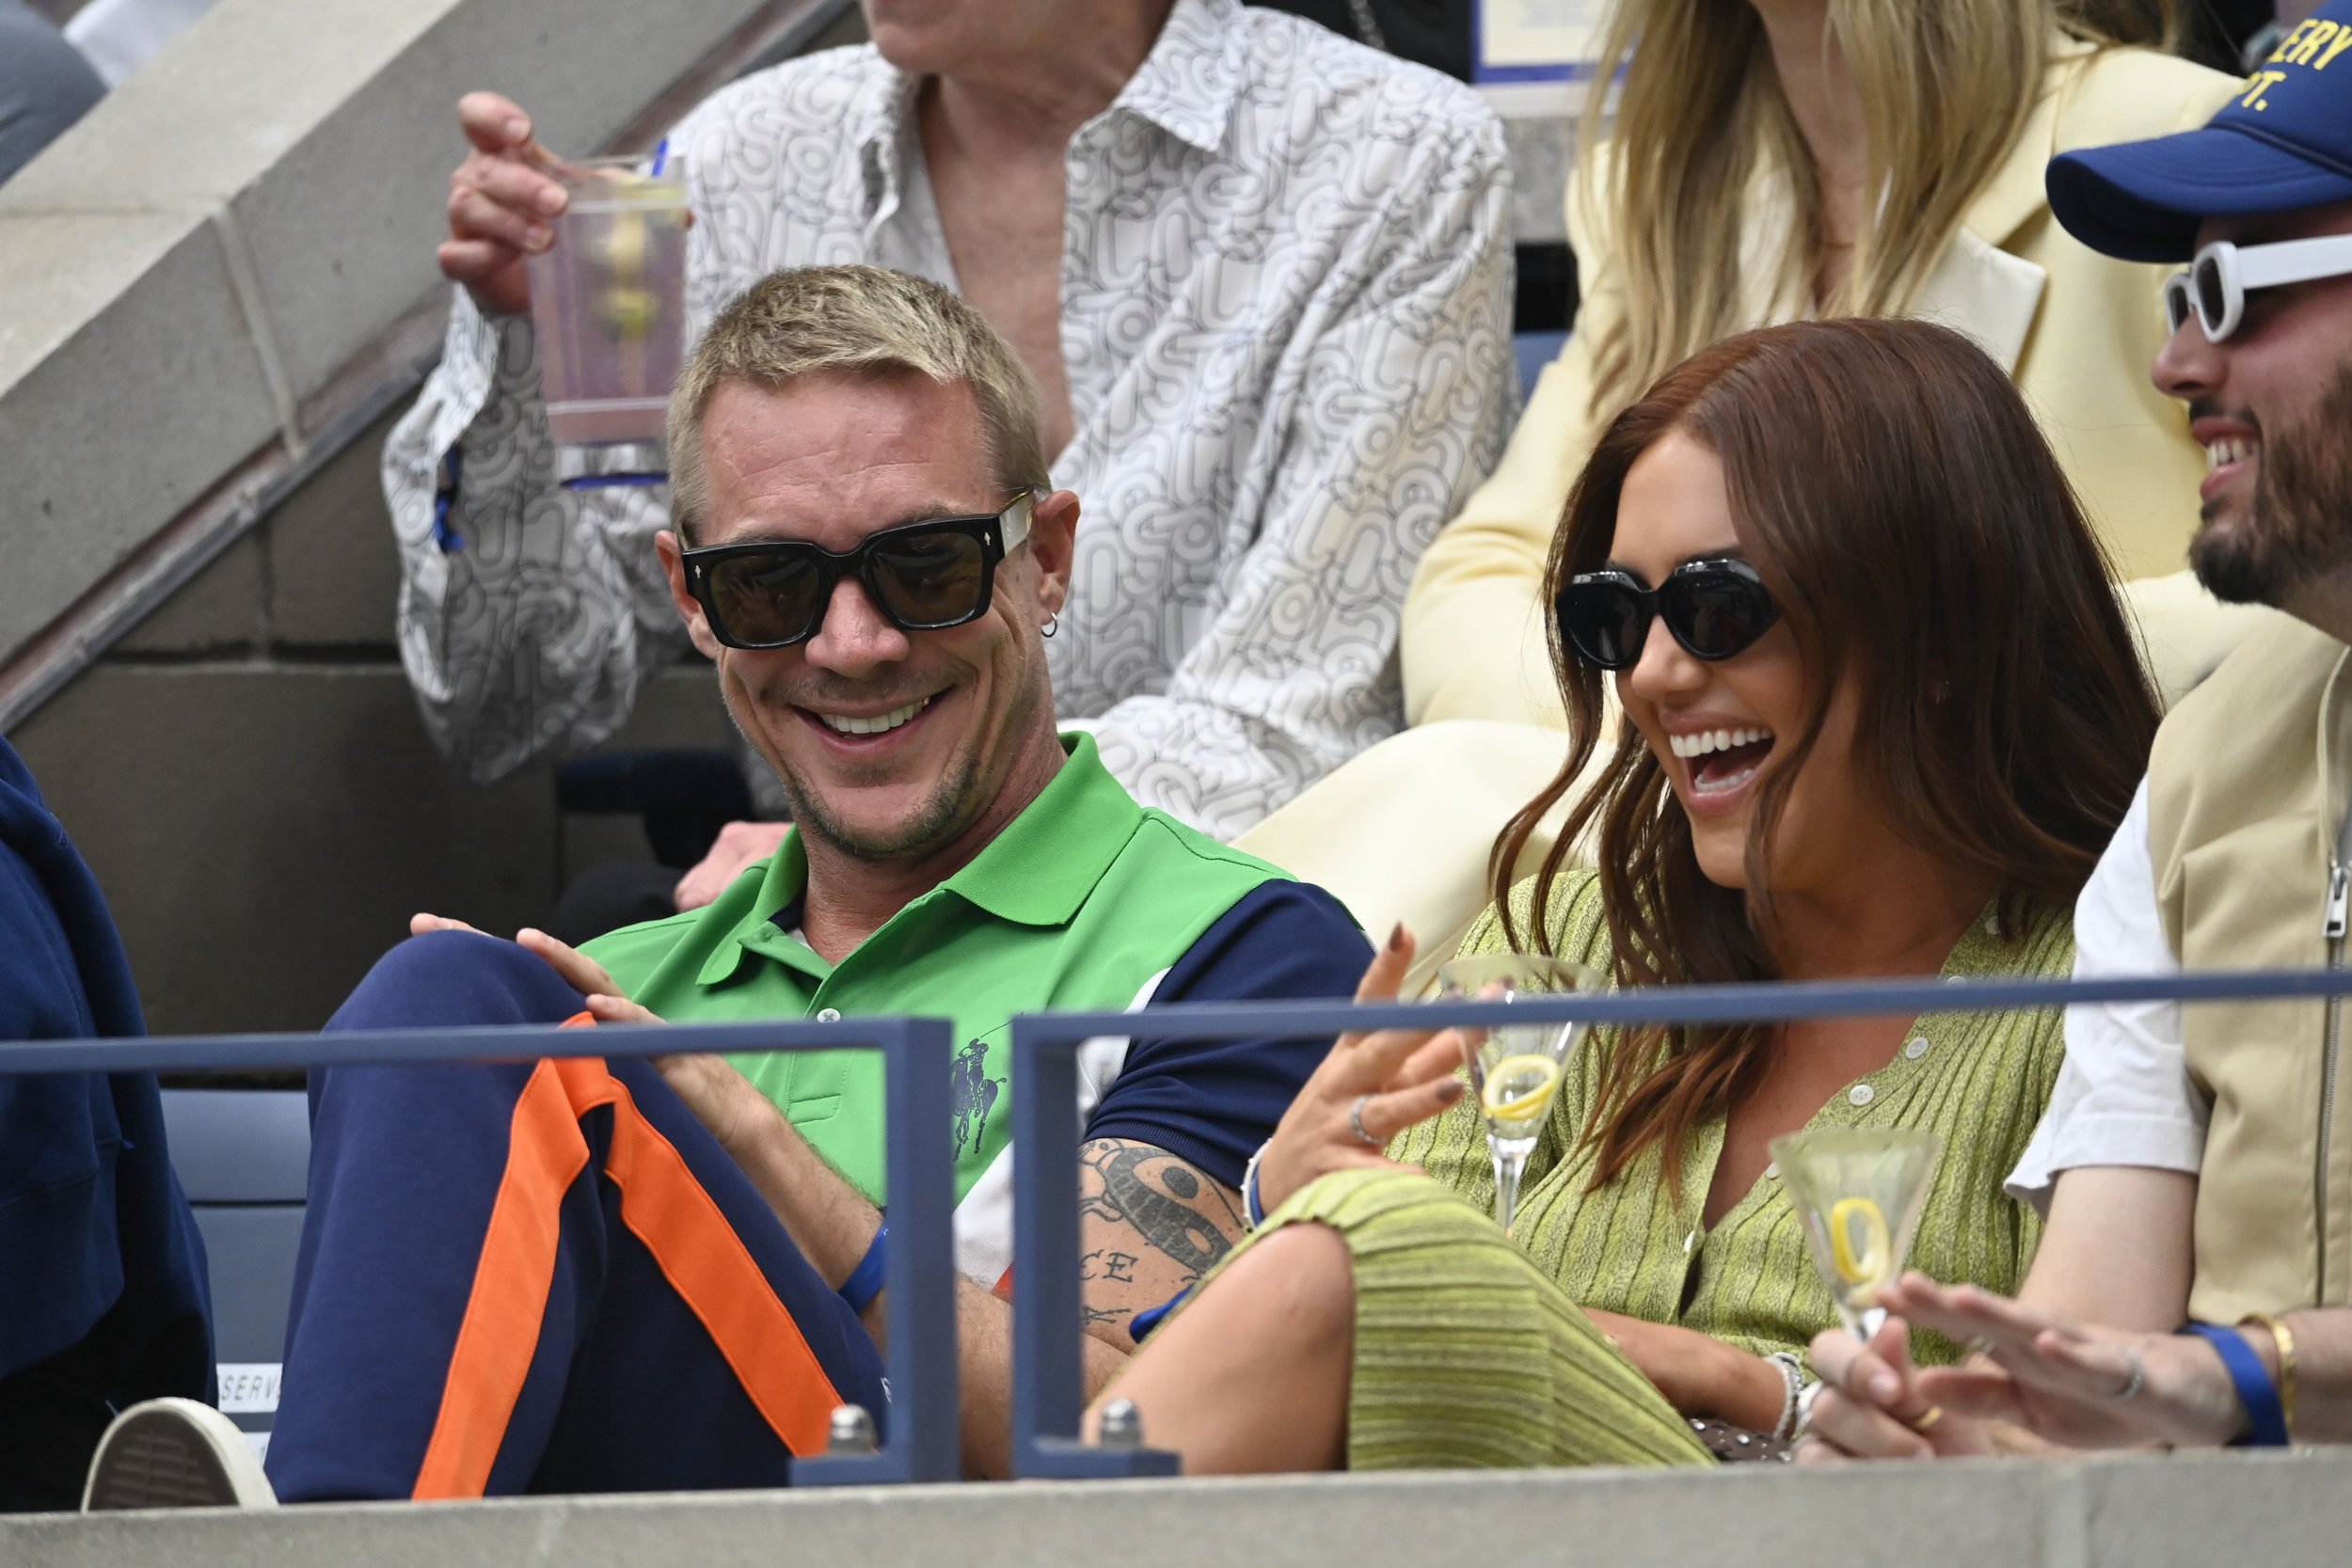 Diplo and Tinx in the Grey Goose Suite at the US Open on September 11, 2022.